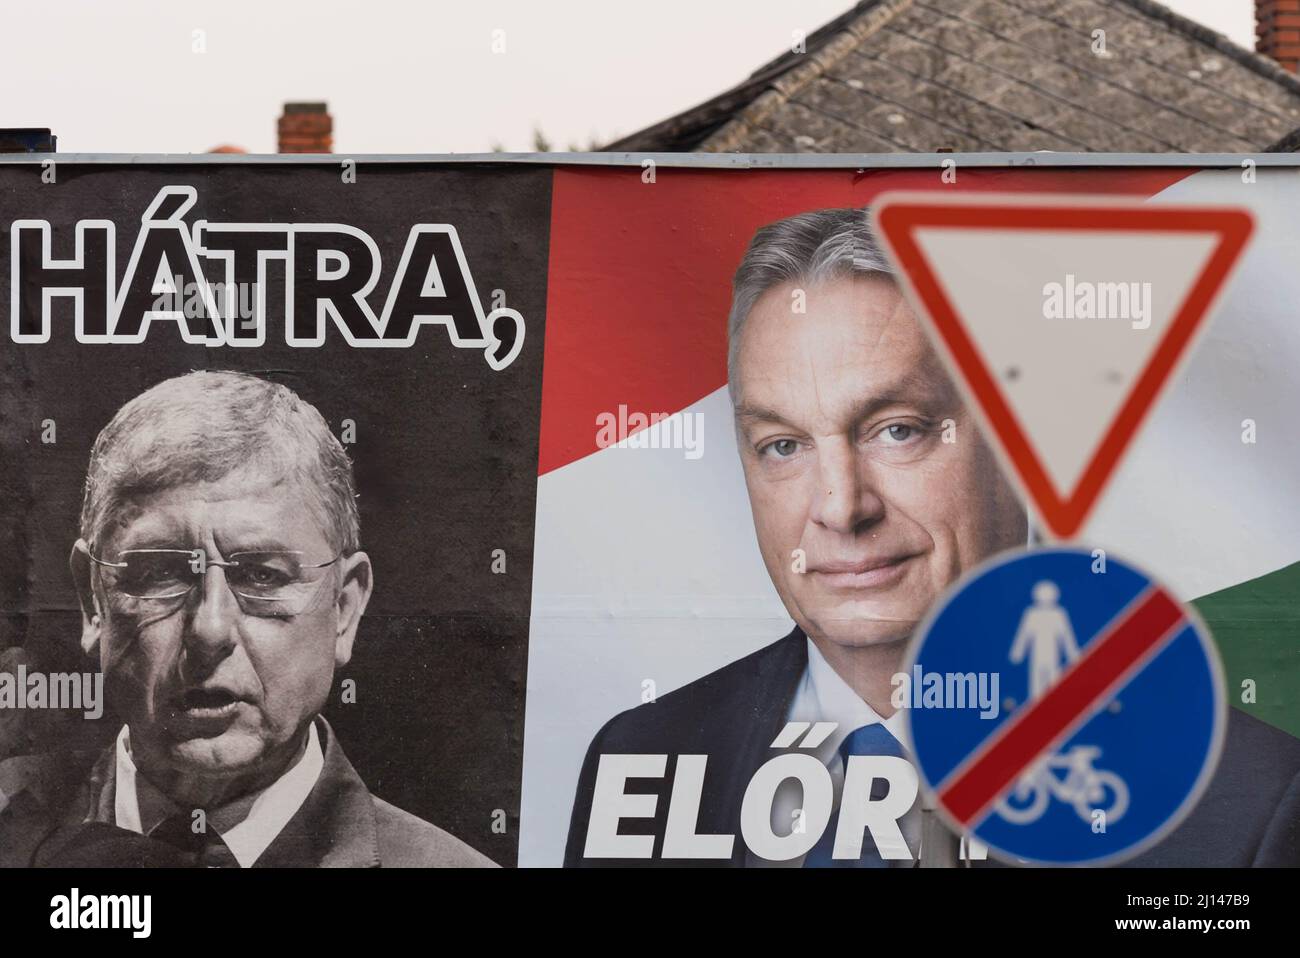 Mosonmagyarovar, Hungary. 18th Mar, 2022. Election billboard for Fidesz party placed on the street of Mosonmagyarovar. On the billboard (from left to right) former prime minister Ferenc Gyurcsany, and Hungarian prime minister and leader of Fidesz Viktor Orban. Mosonmagyarovar is the town in northwest Hungary located approx. 160 kilometers from Hungarian capital Budapest. Peter Marki-Zay will challenge prime minister Viktor Orban in the upcoming parliamentary elections, which will be held on the 3rd of April 2022. (Photo by Tomas Tkacik/SOPA Images/Sipa USA) Credit: Sipa USA/Alamy Live News Stock Photo